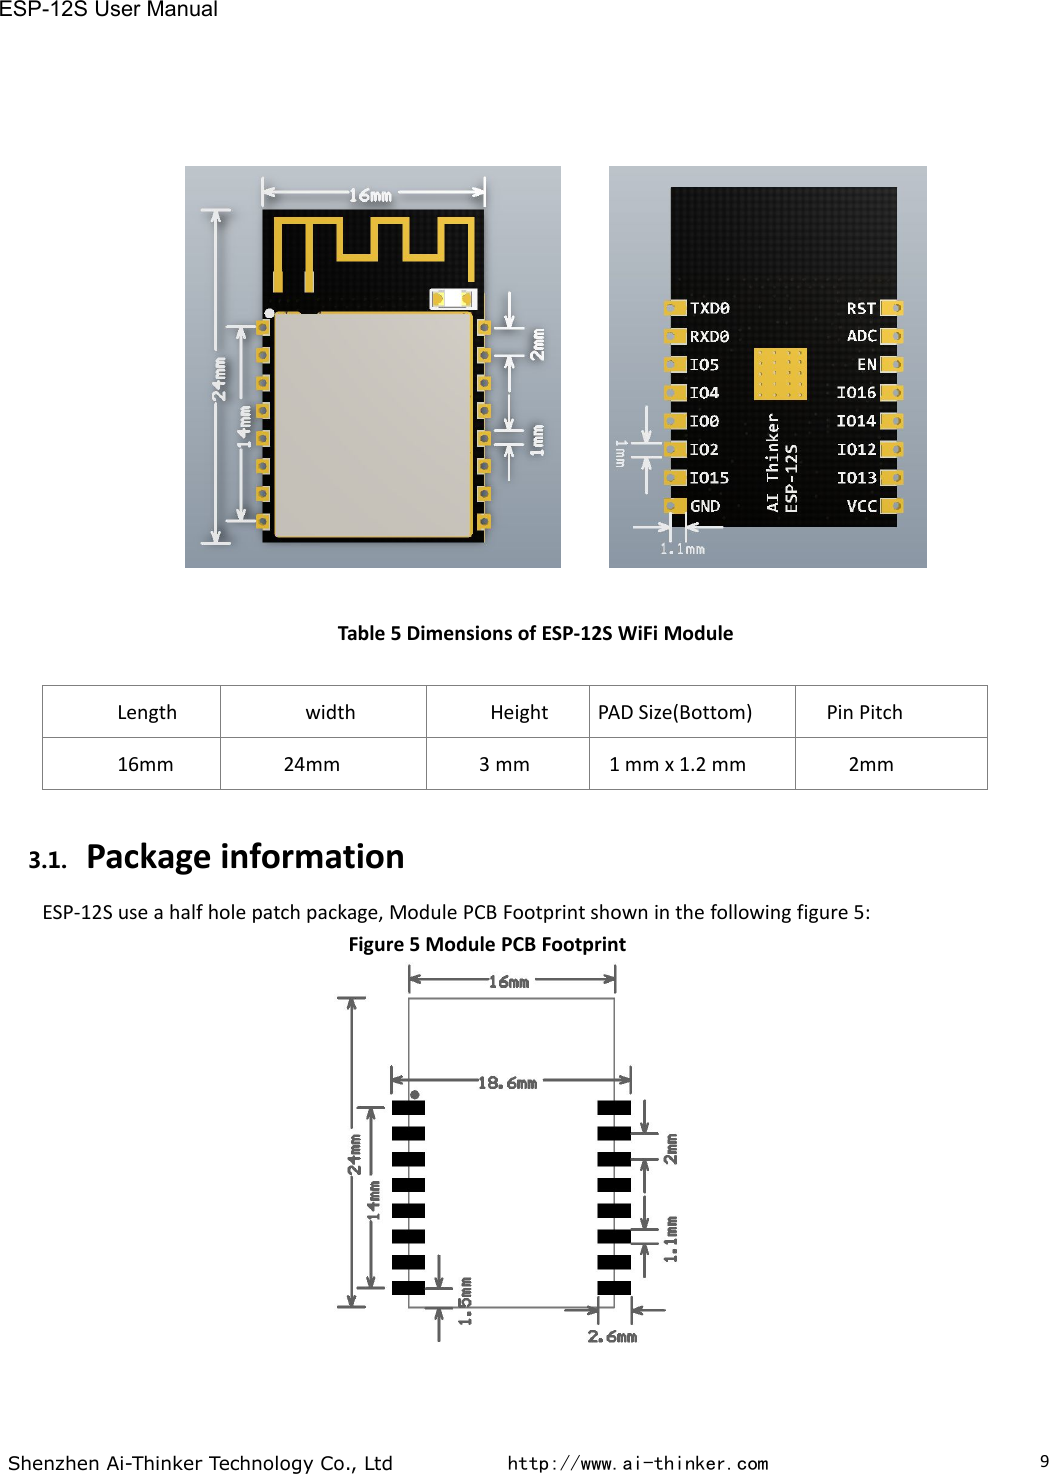 ESP-12S User ManualShenzhen Ai-Thinker Technology Co., Ltd http://www.ai-thinker.com9Table 5 Dimensions of ESP-12S WiFi ModuleLengthwidthHeightPAD Size(Bottom)Pin Pitch16mm24mm3 mm1 mm x 1.2 mm2mm3.1. Package informationESP-12S use a half hole patch package, Module PCB Footprint shown in the following figure 5:Figure 5 Module PCB Footprint